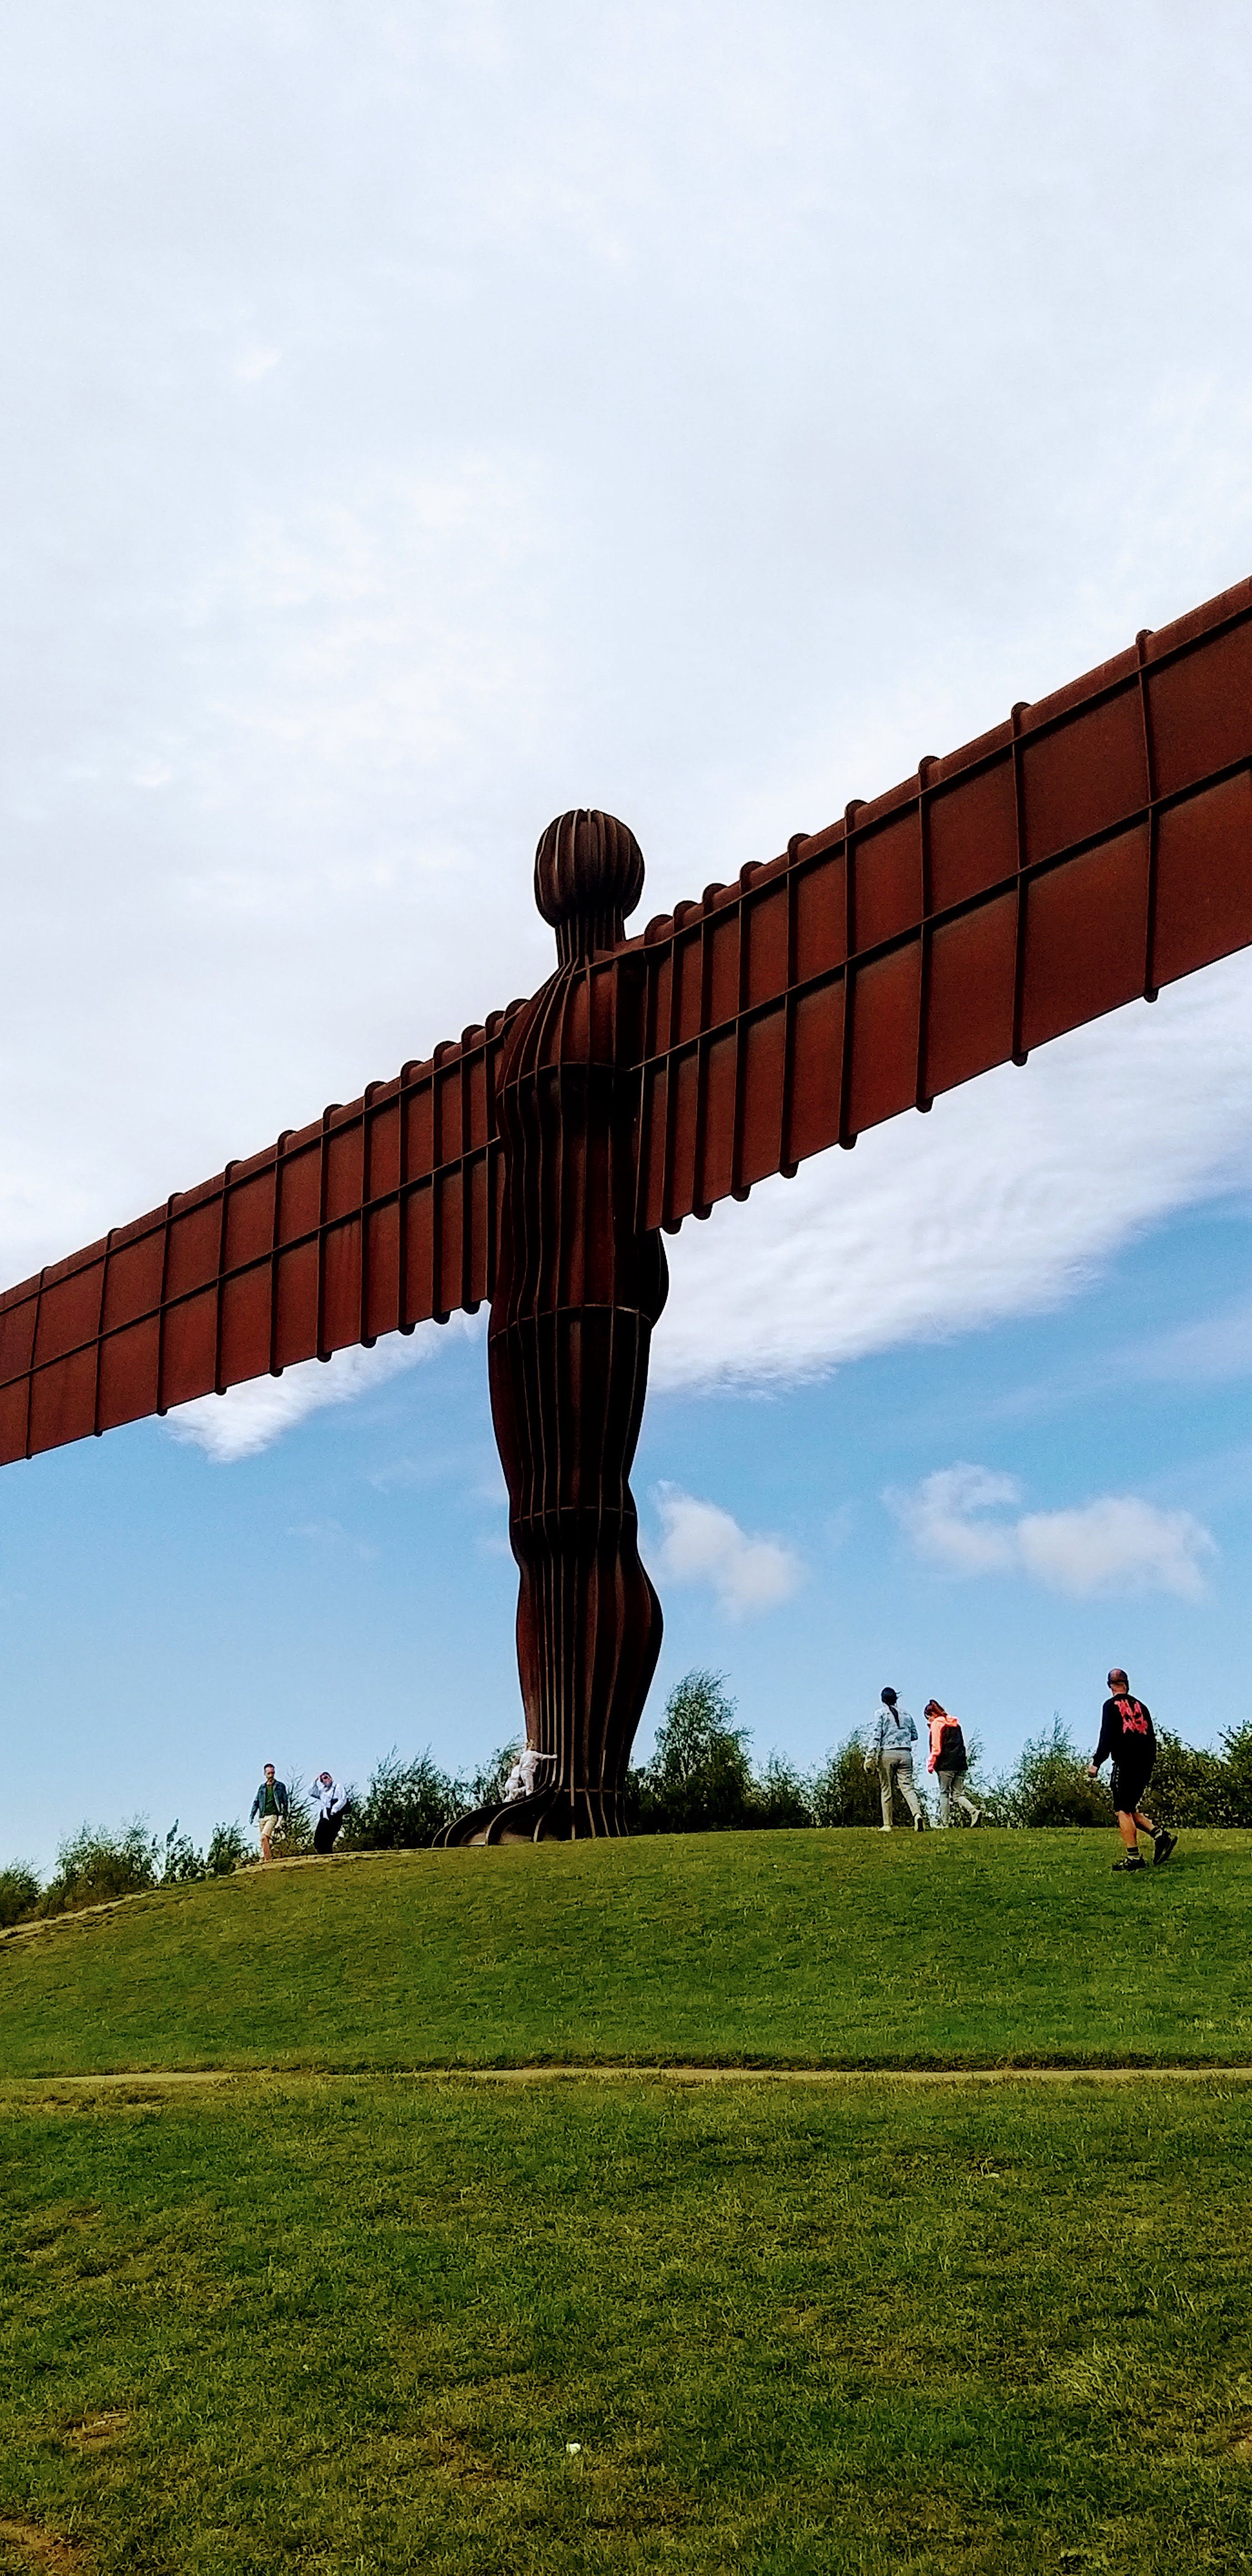 Angel of the North on the day of ending the challenge